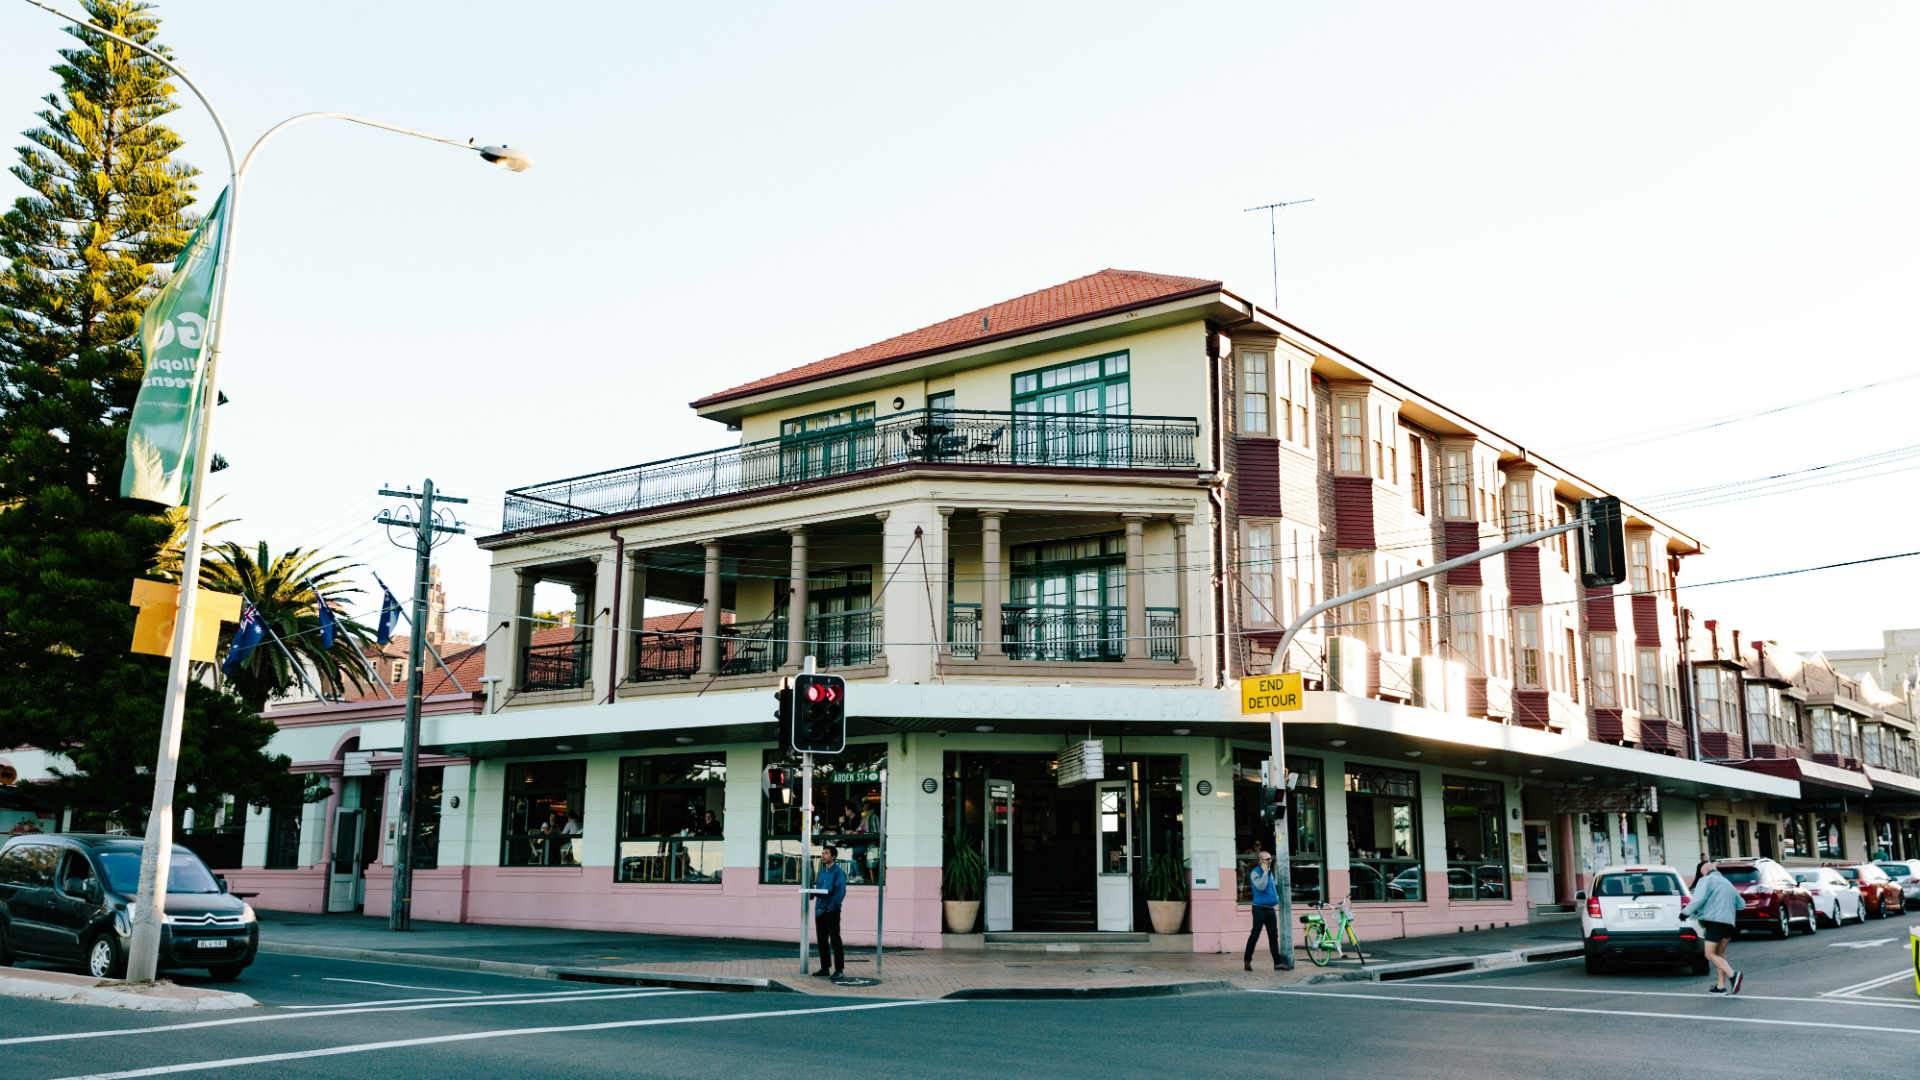 Valentine's Day Party at Coogee Bay Hotel